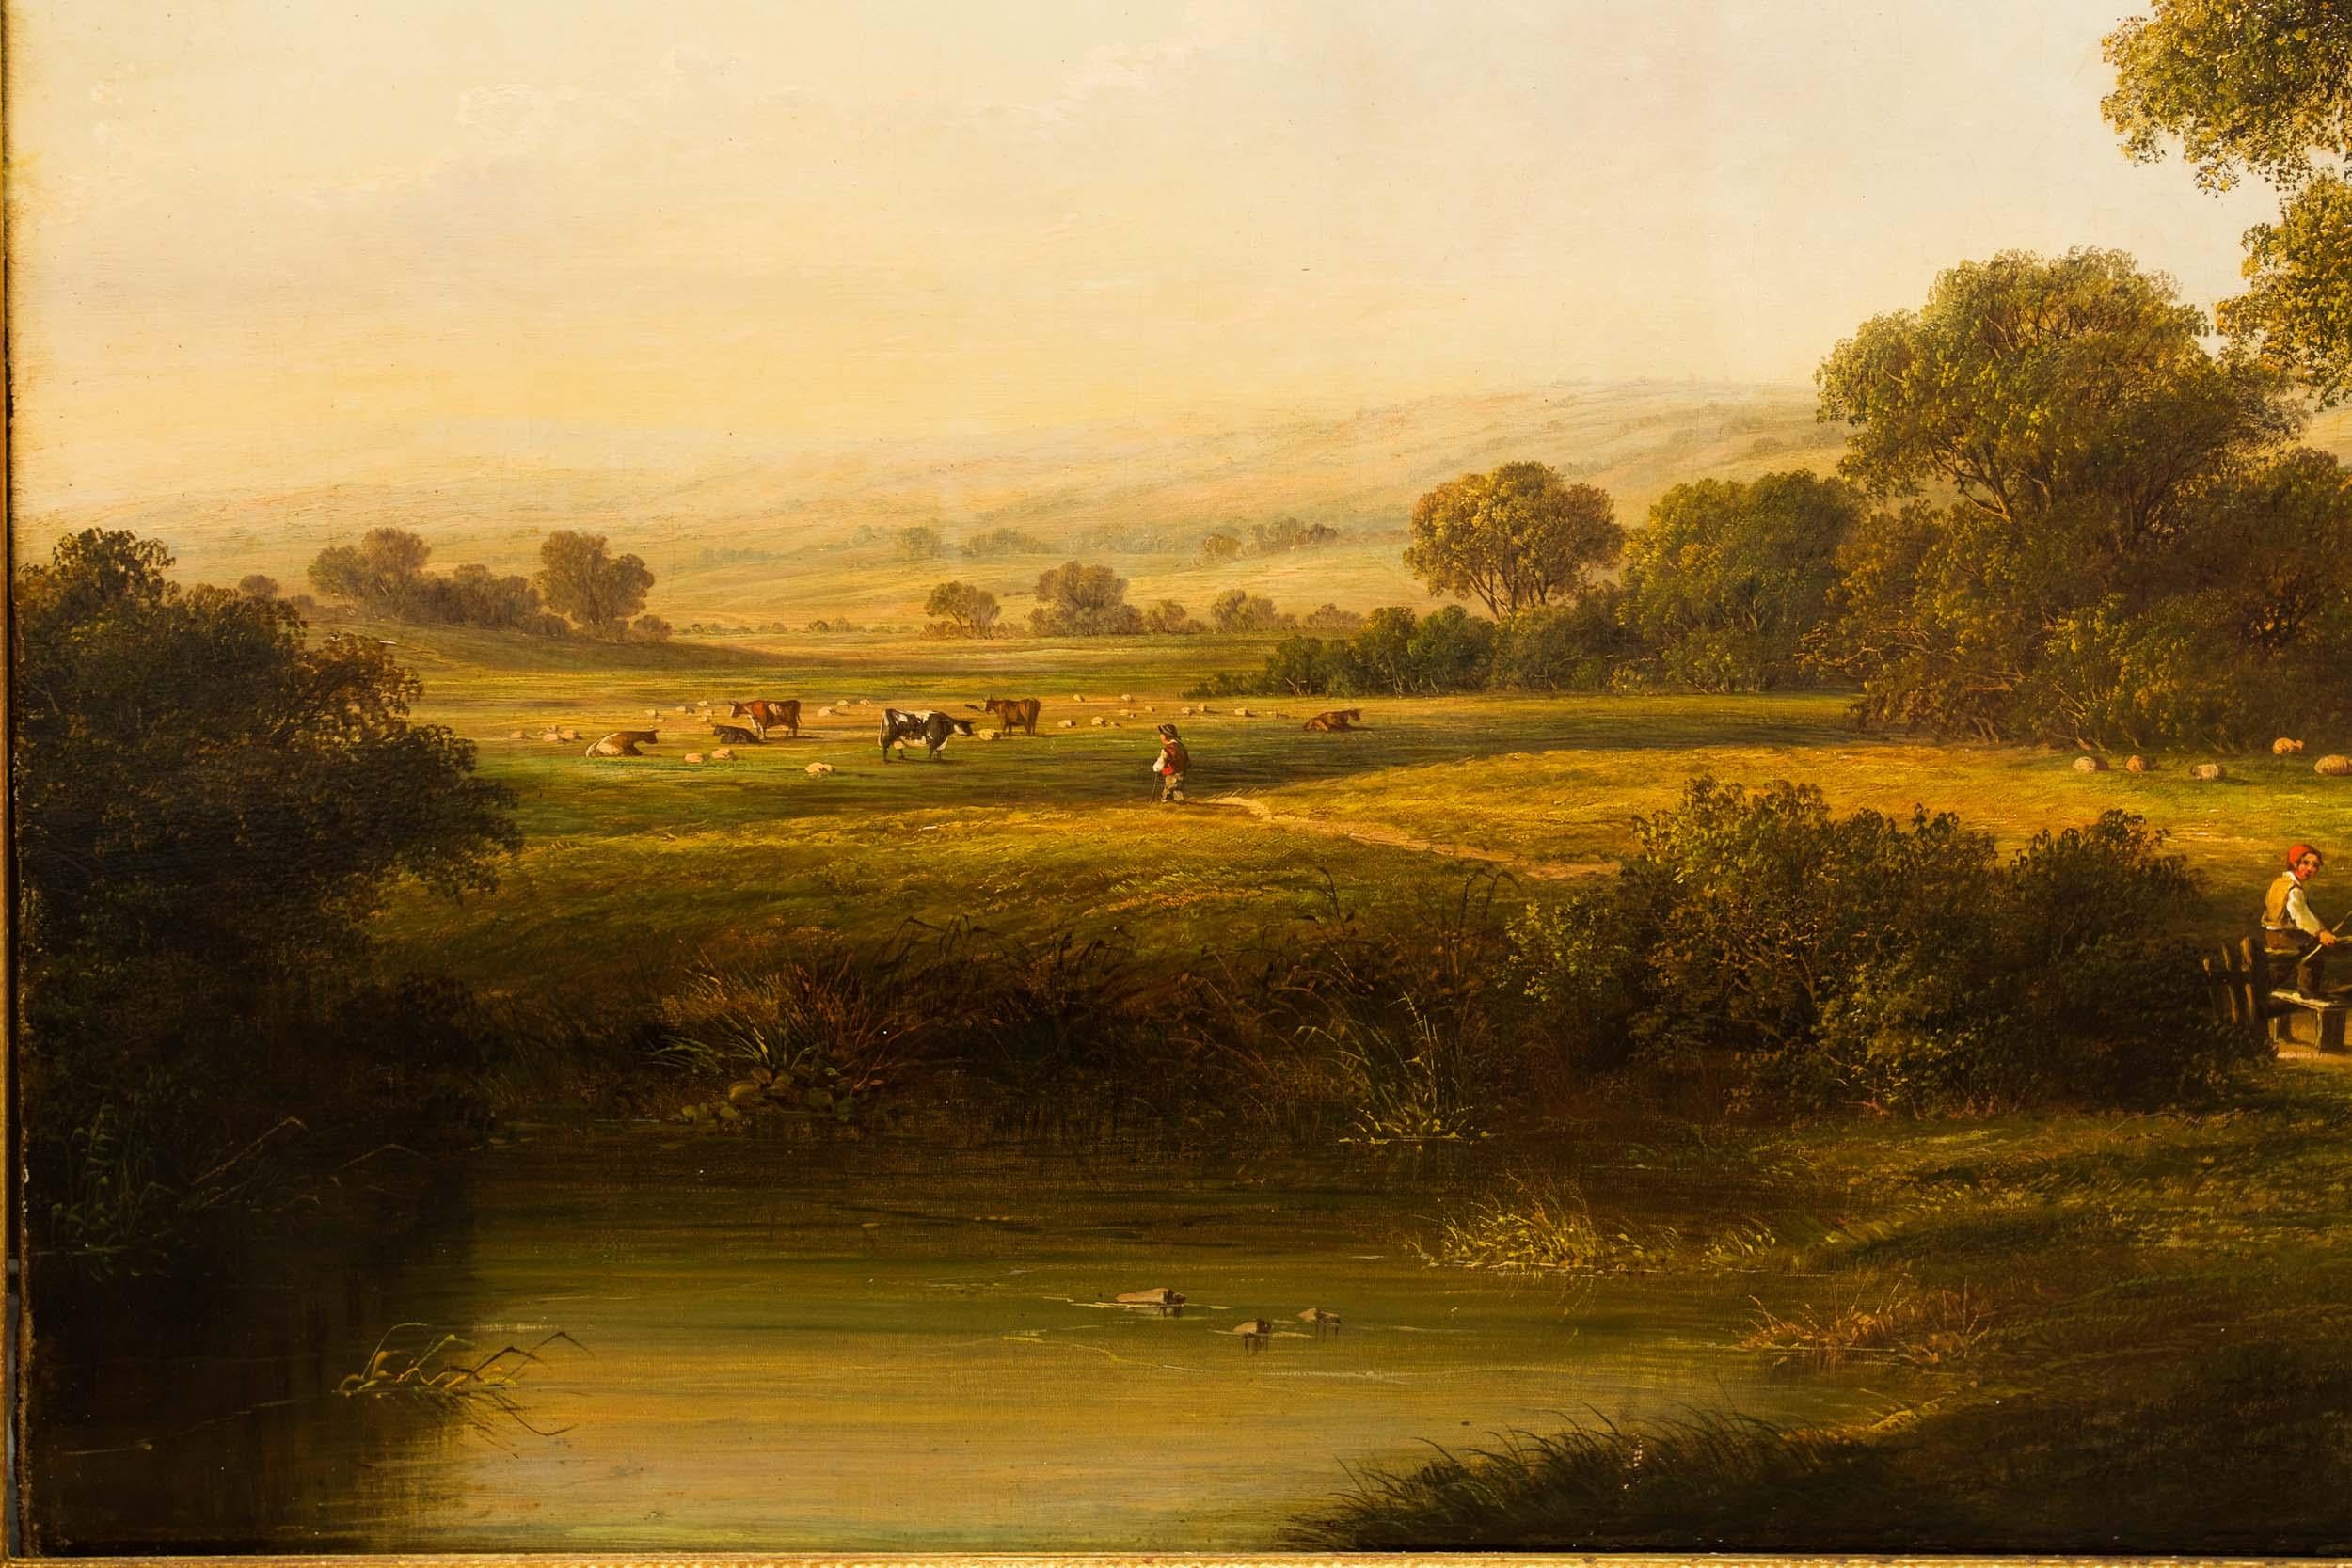 Romantic English Antique Landscape Painting of Countryside by Edward Charles Williams